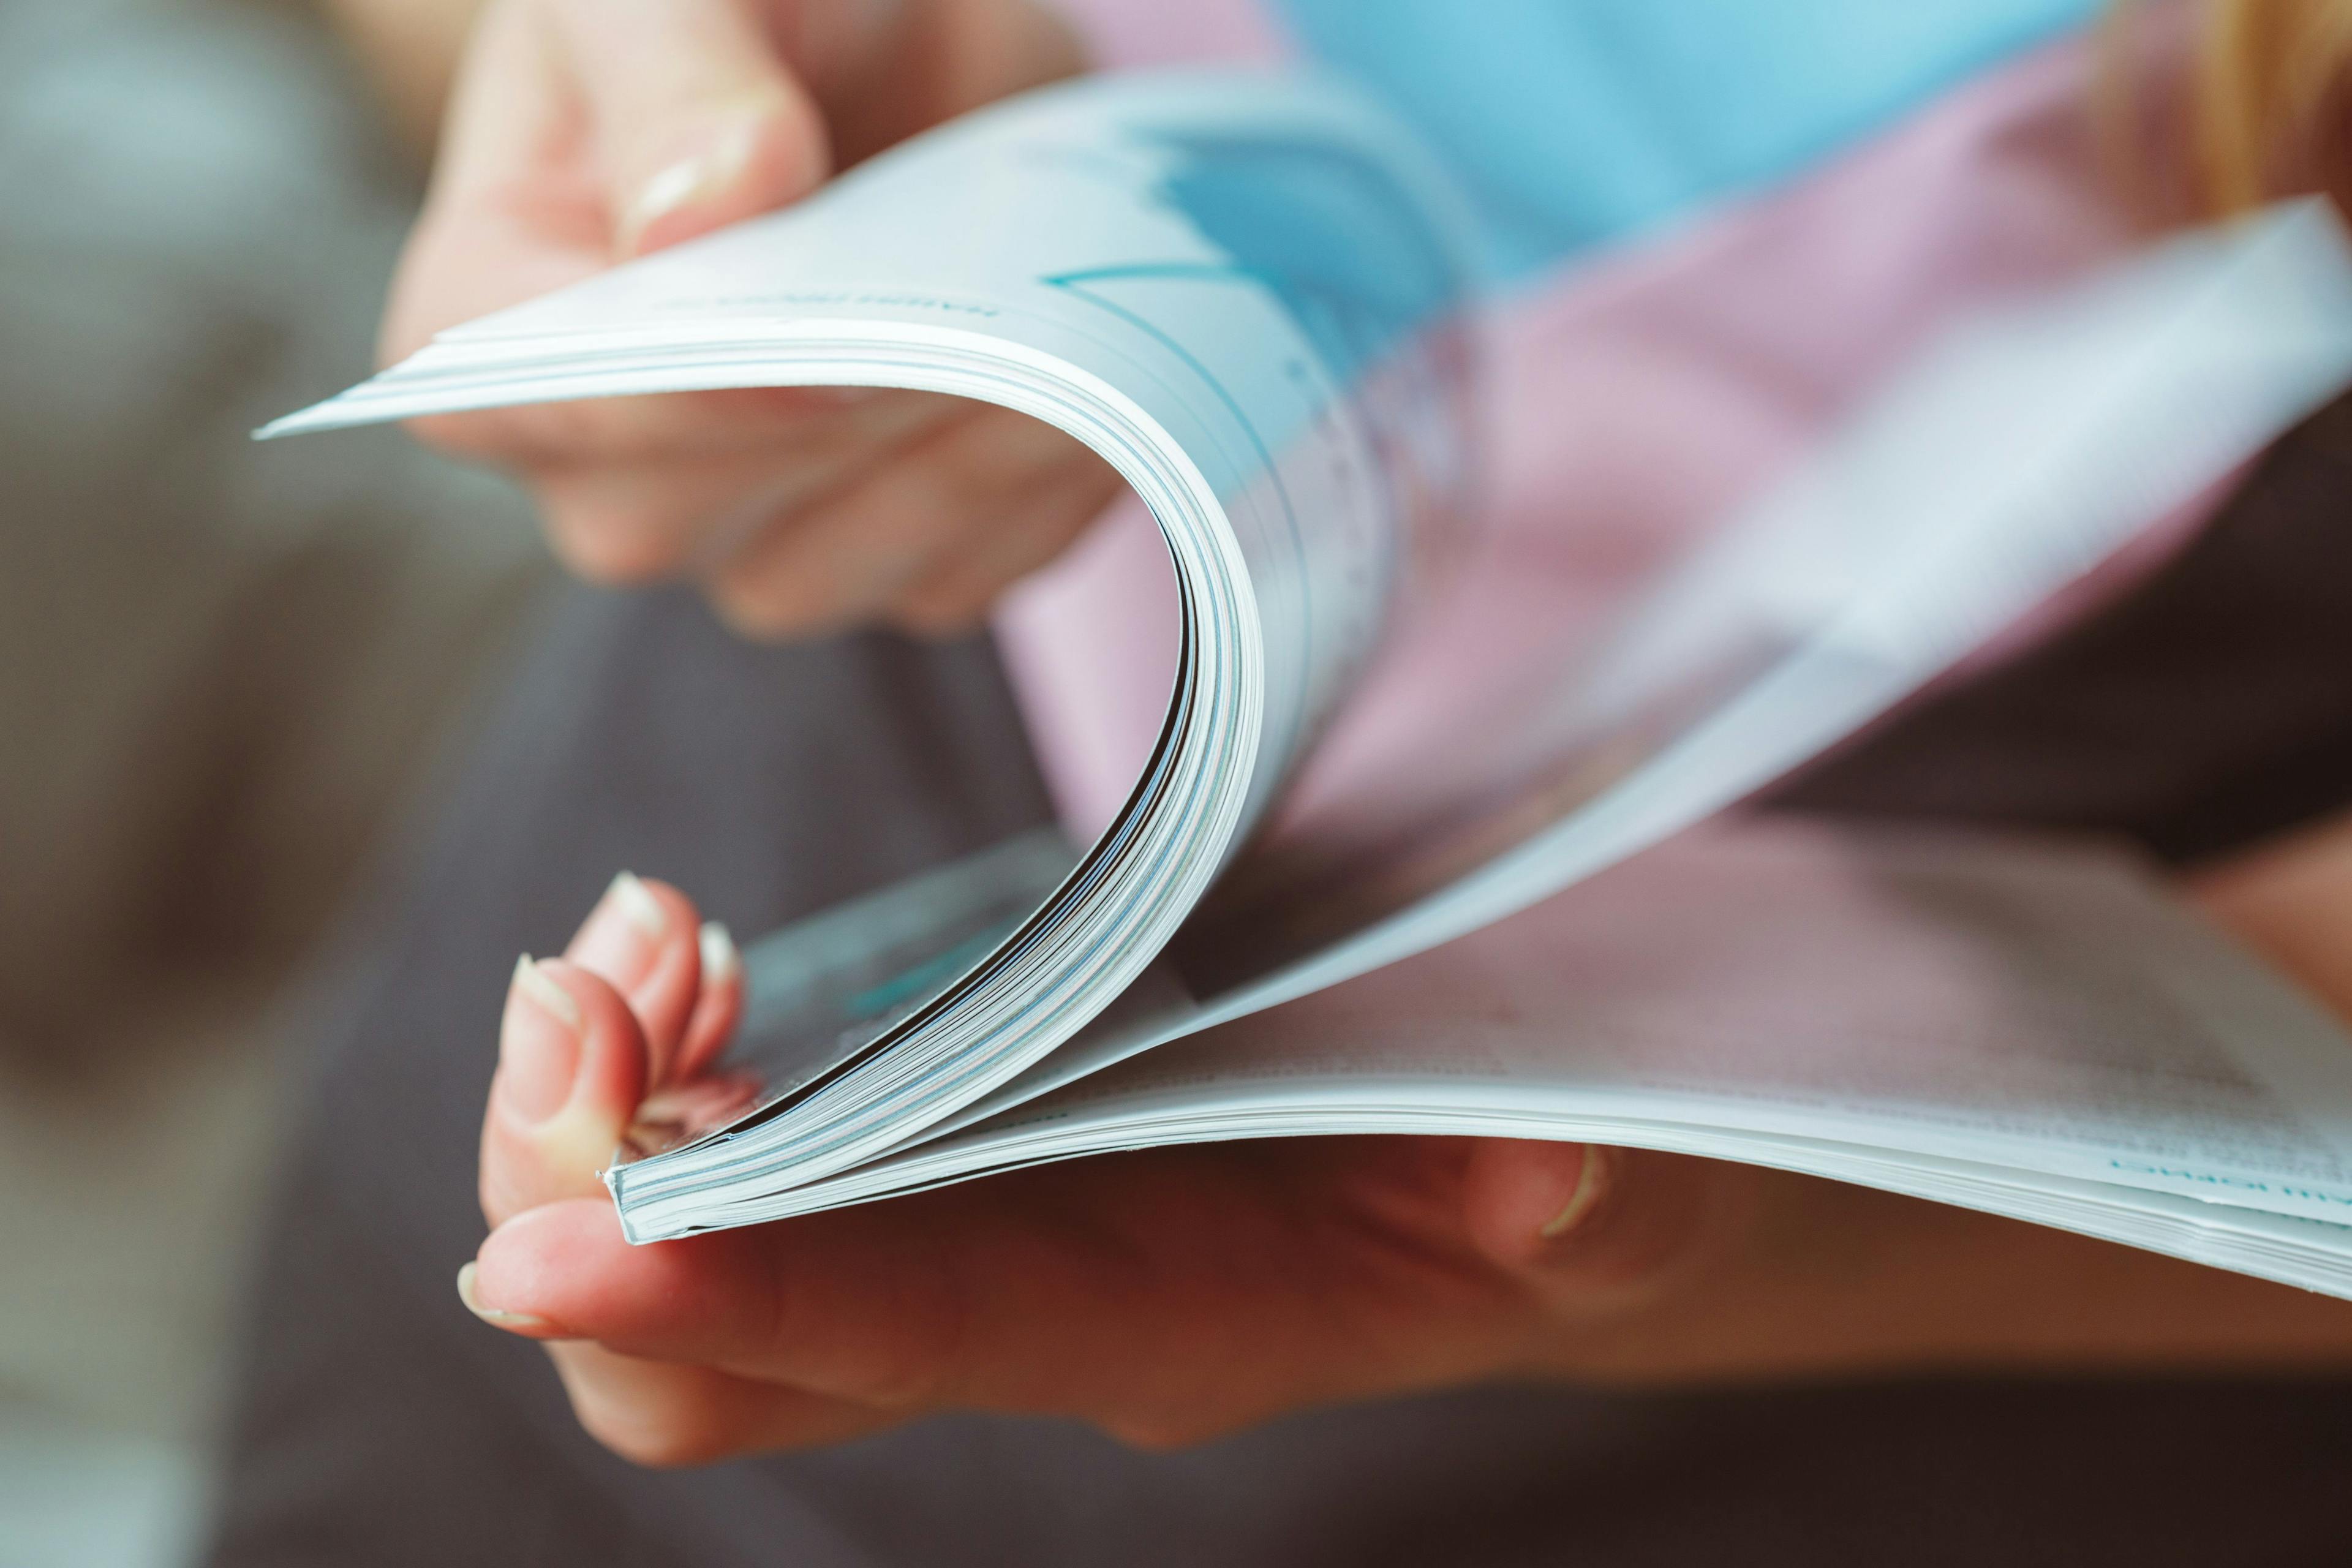  What We’re Reading: Research Data Manipulation; Maternal Deaths from Lack of Abortion Care